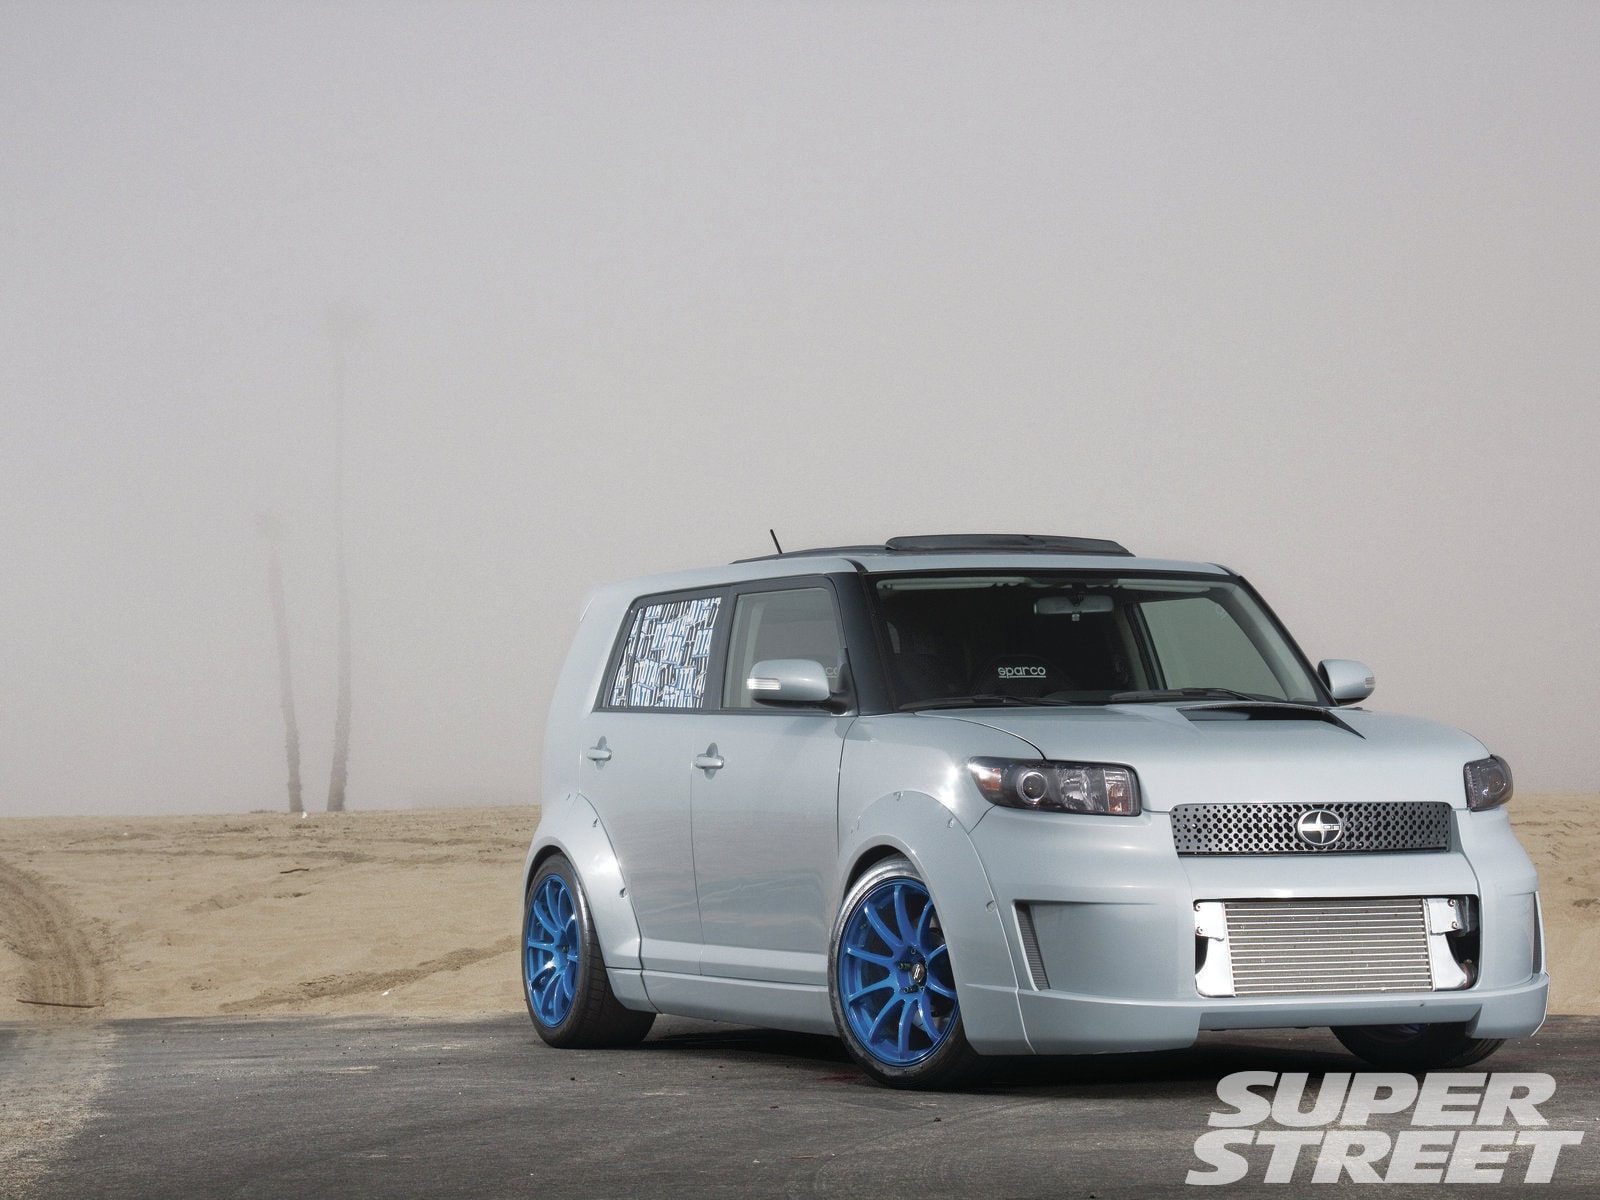 2008 Scion xB - A Wolf In Sheep's Clothing